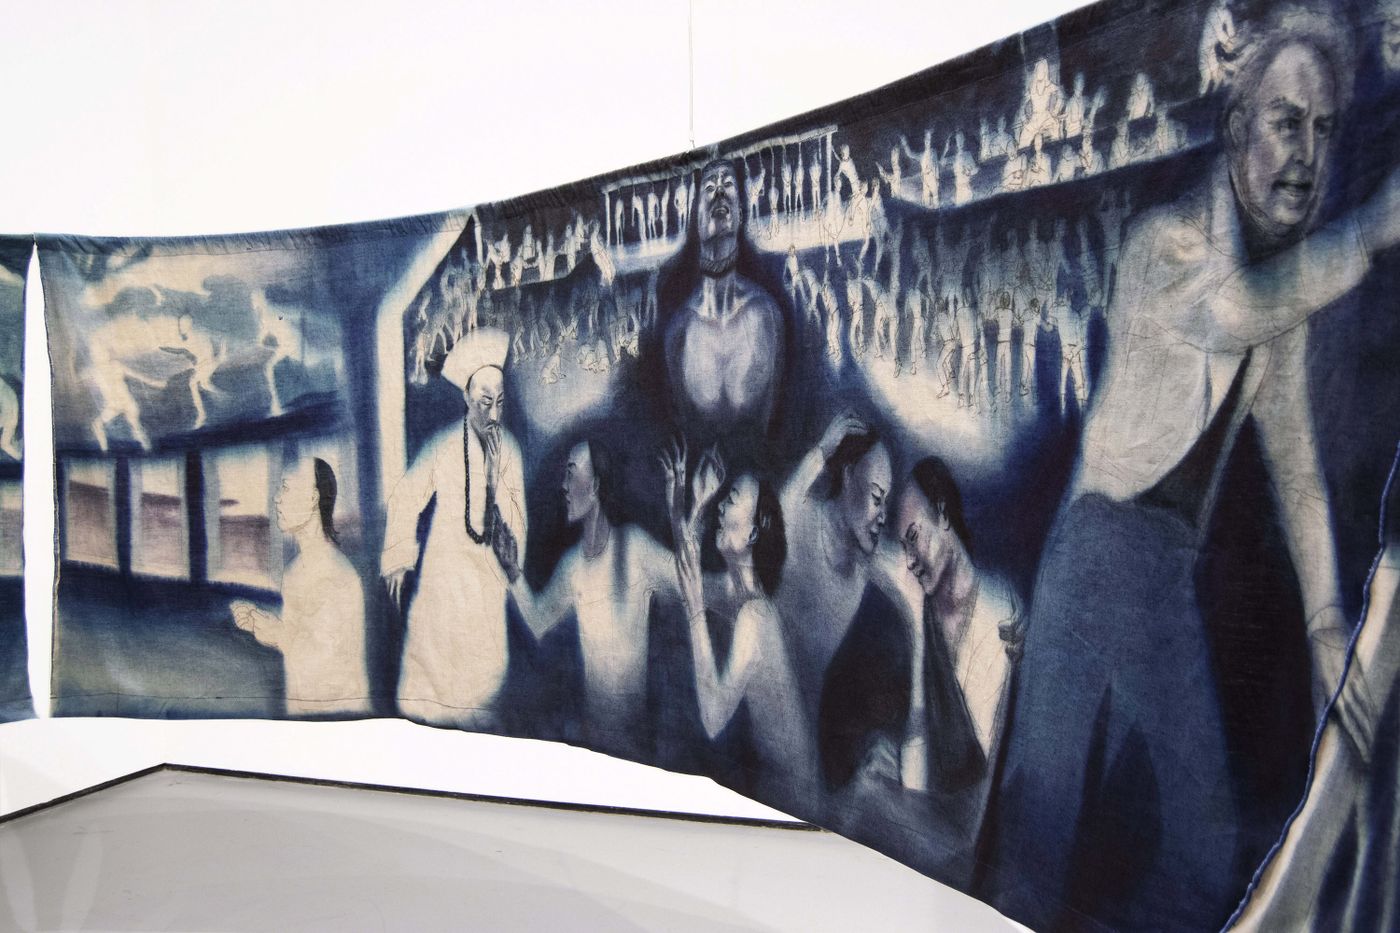 The Robert Browne (interior view), 2022. Fabric dye, charcoal, thread, linen, and steel; 78 x 96 x 168 in., painting dimensions 48 x 420 in. Photo courtesy the artist.